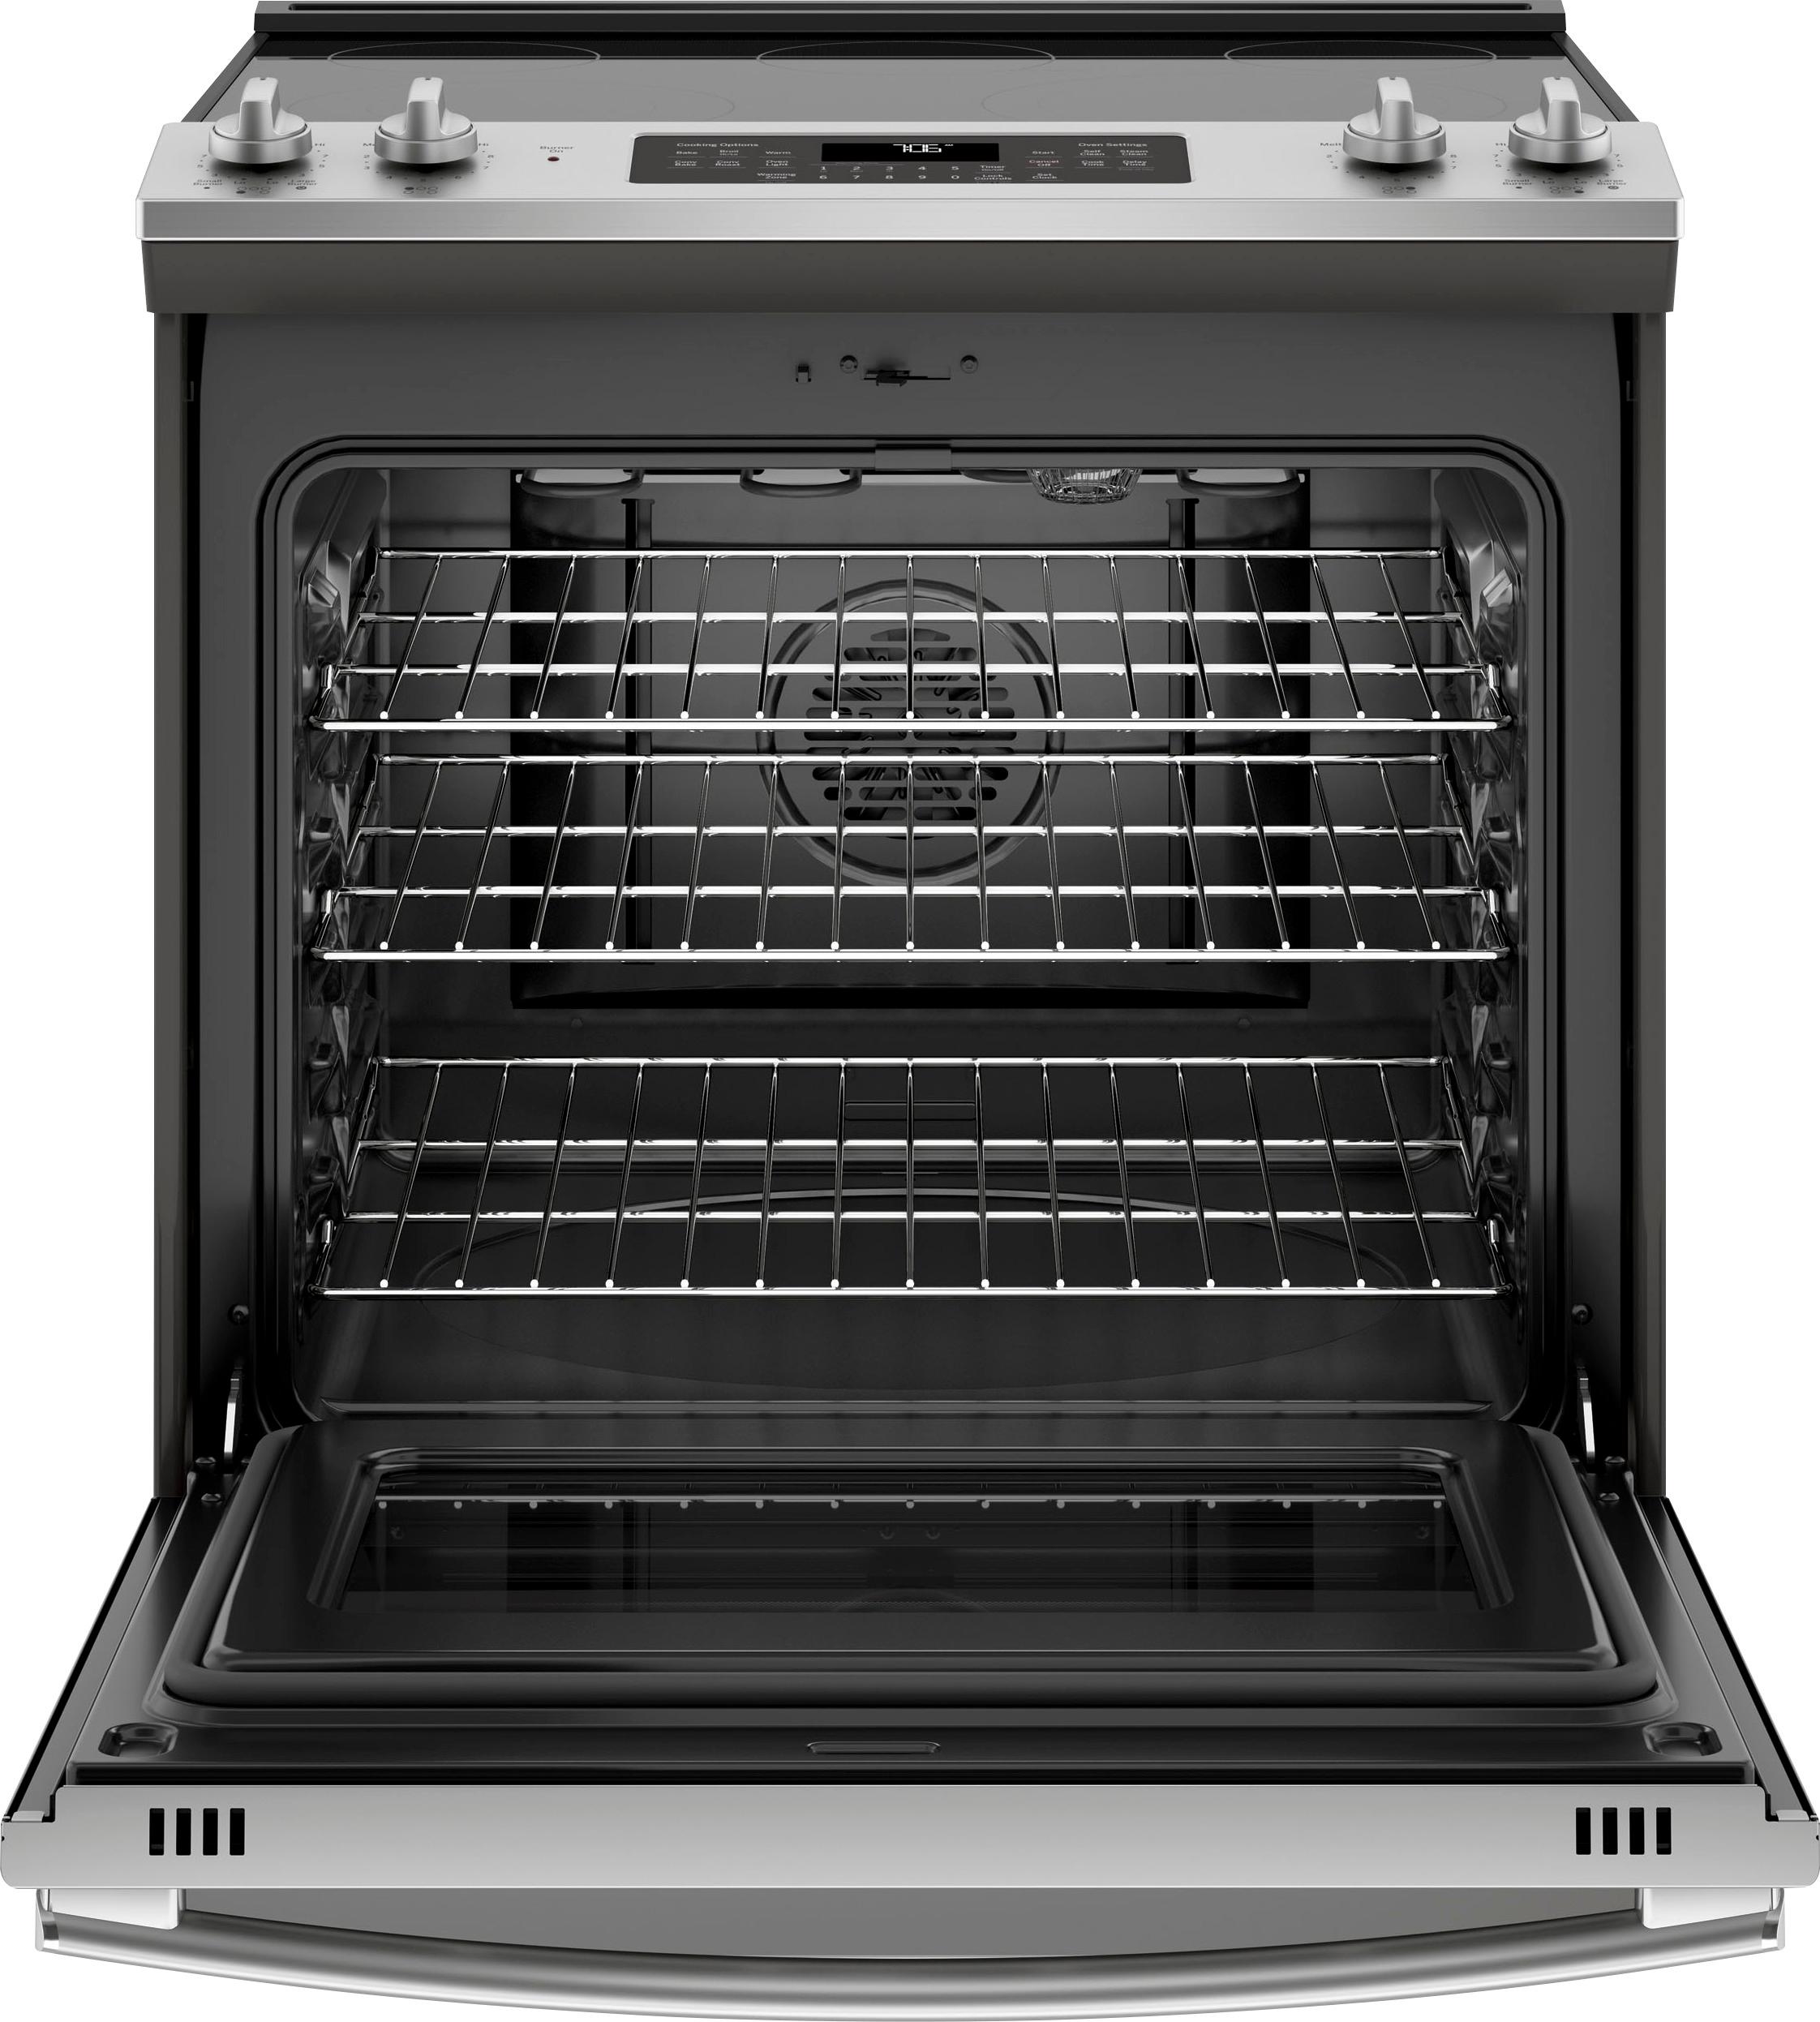 Angle View: GE - 5.3 Cu. Ft. Slide-In Electric Convection Range - Stainless steel